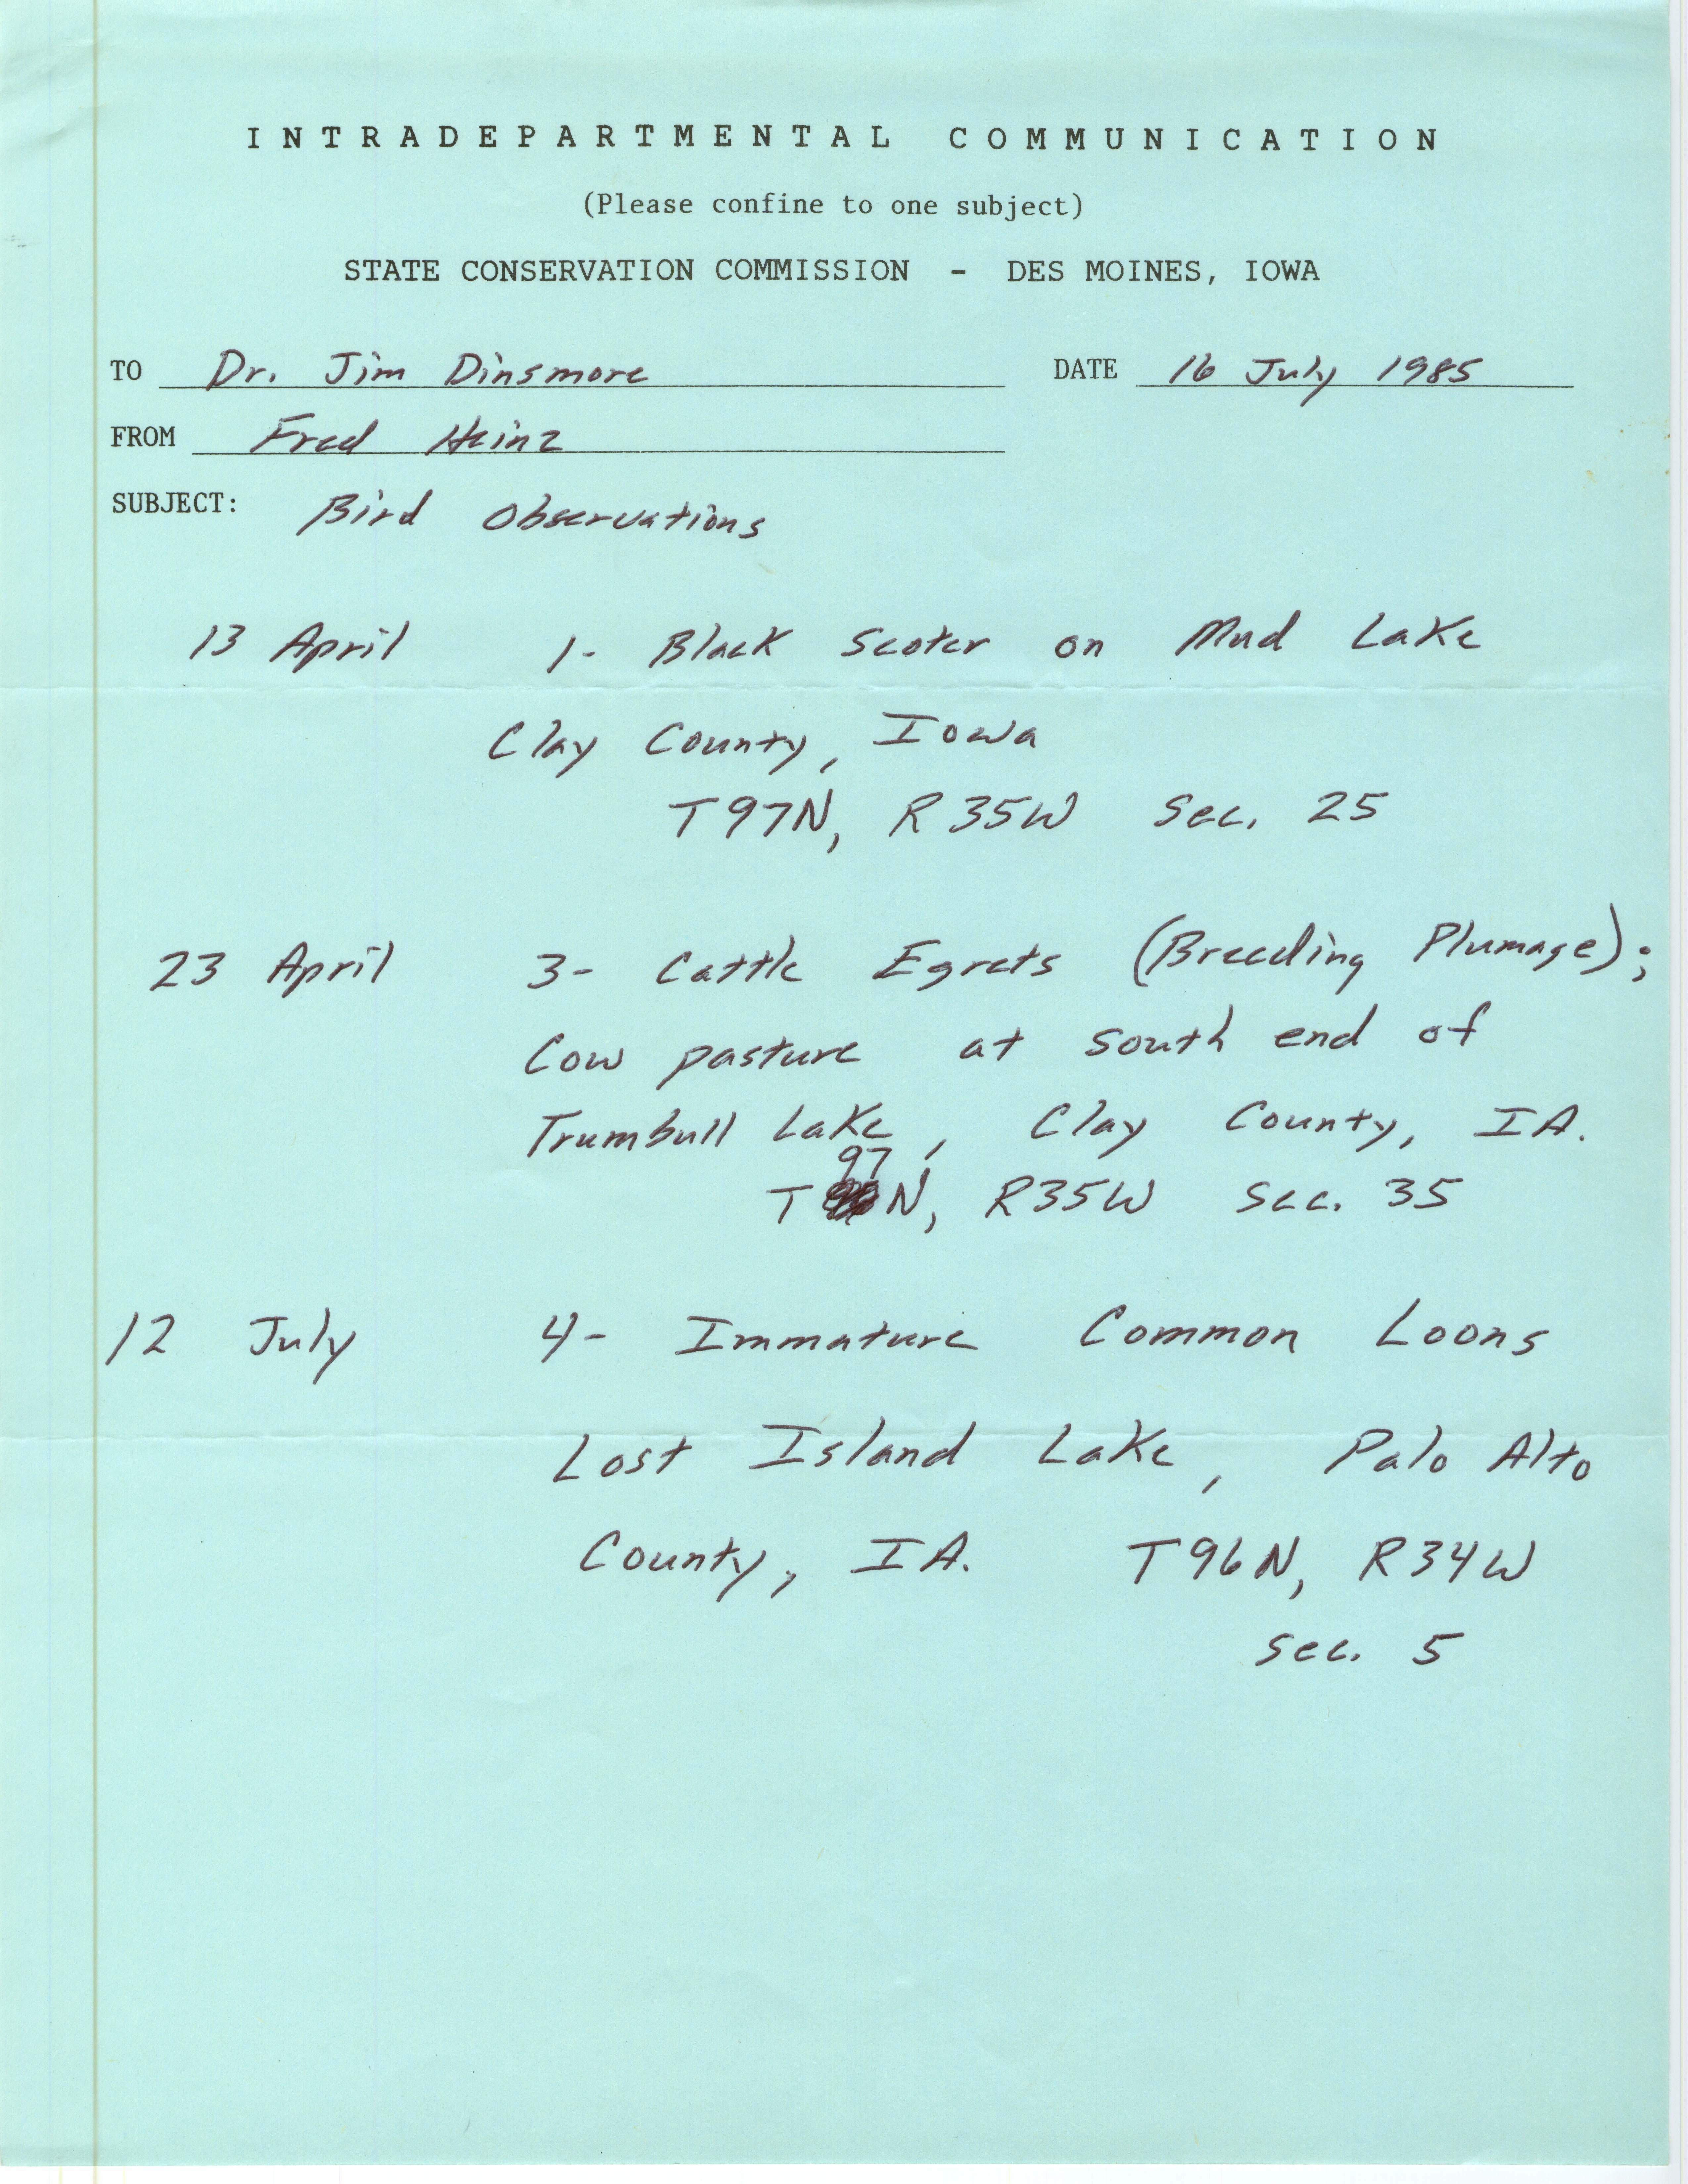 Field notes contributed by Fred Heinz, July 16, 1985